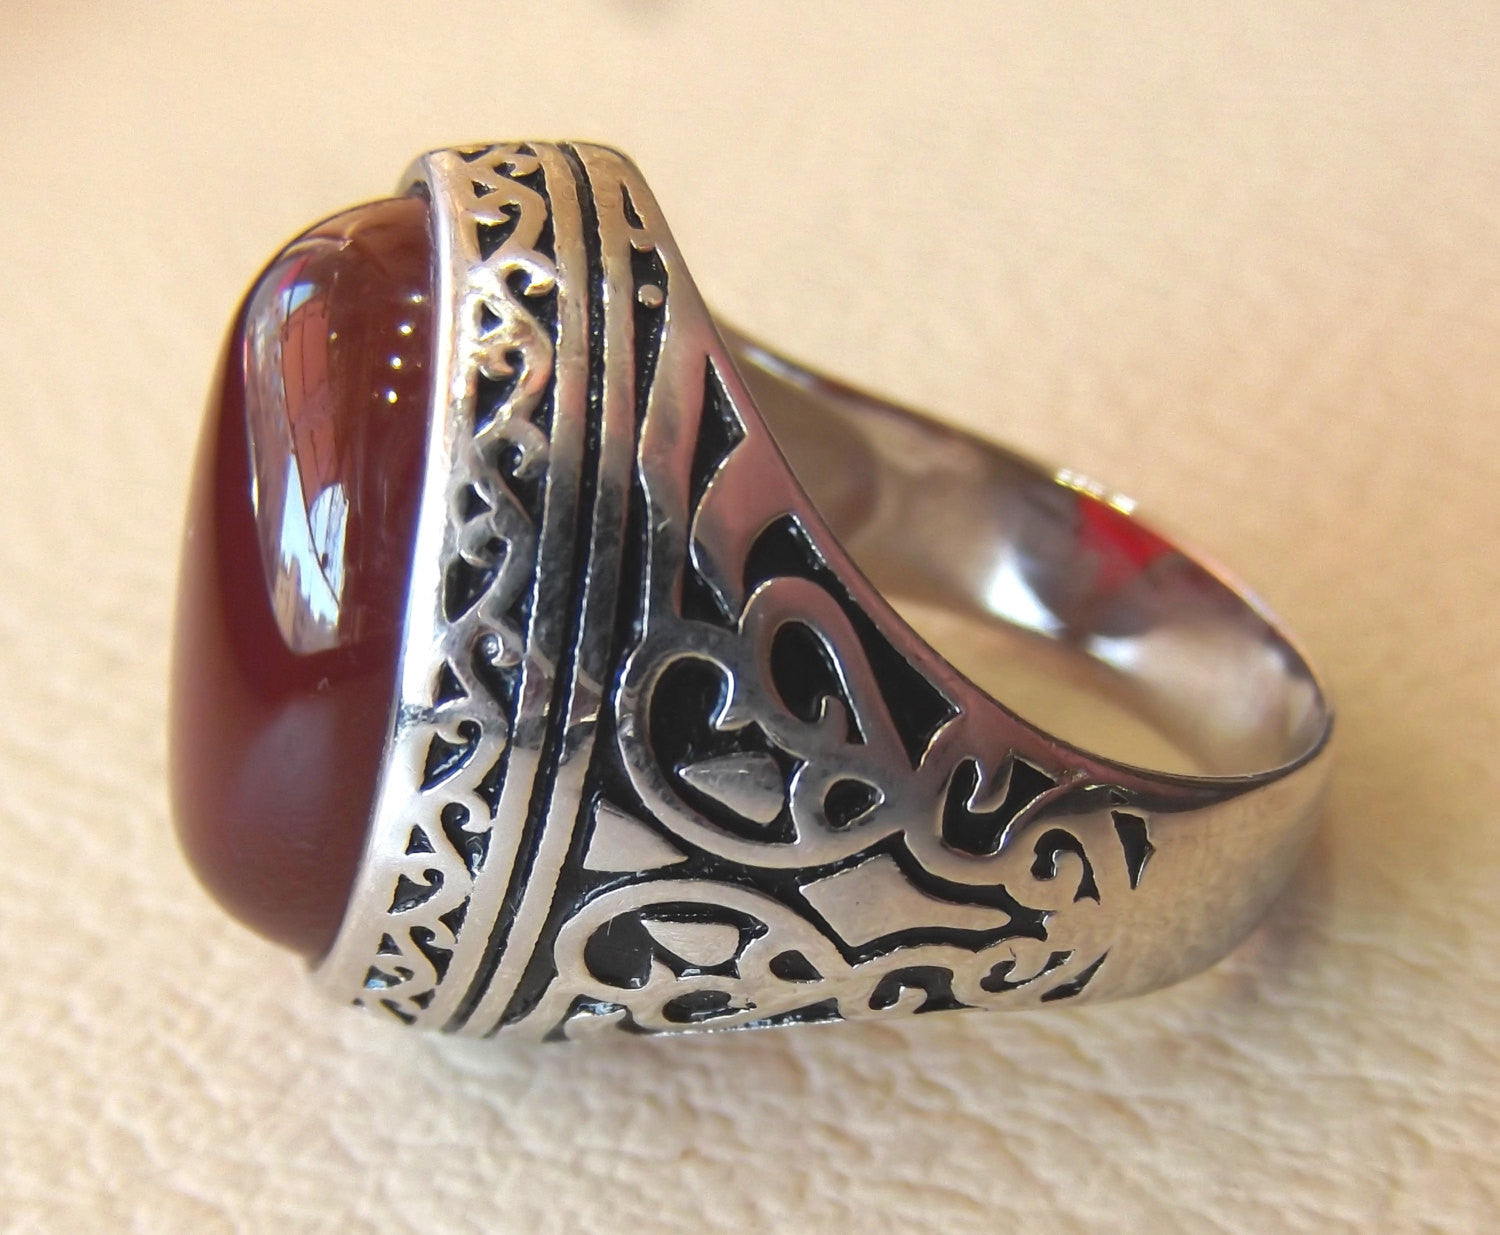 aqeeq natural liver agate carnelian semi precious stone oval red cabochon gem man ring sterling silver arabic middle eastern turkey style